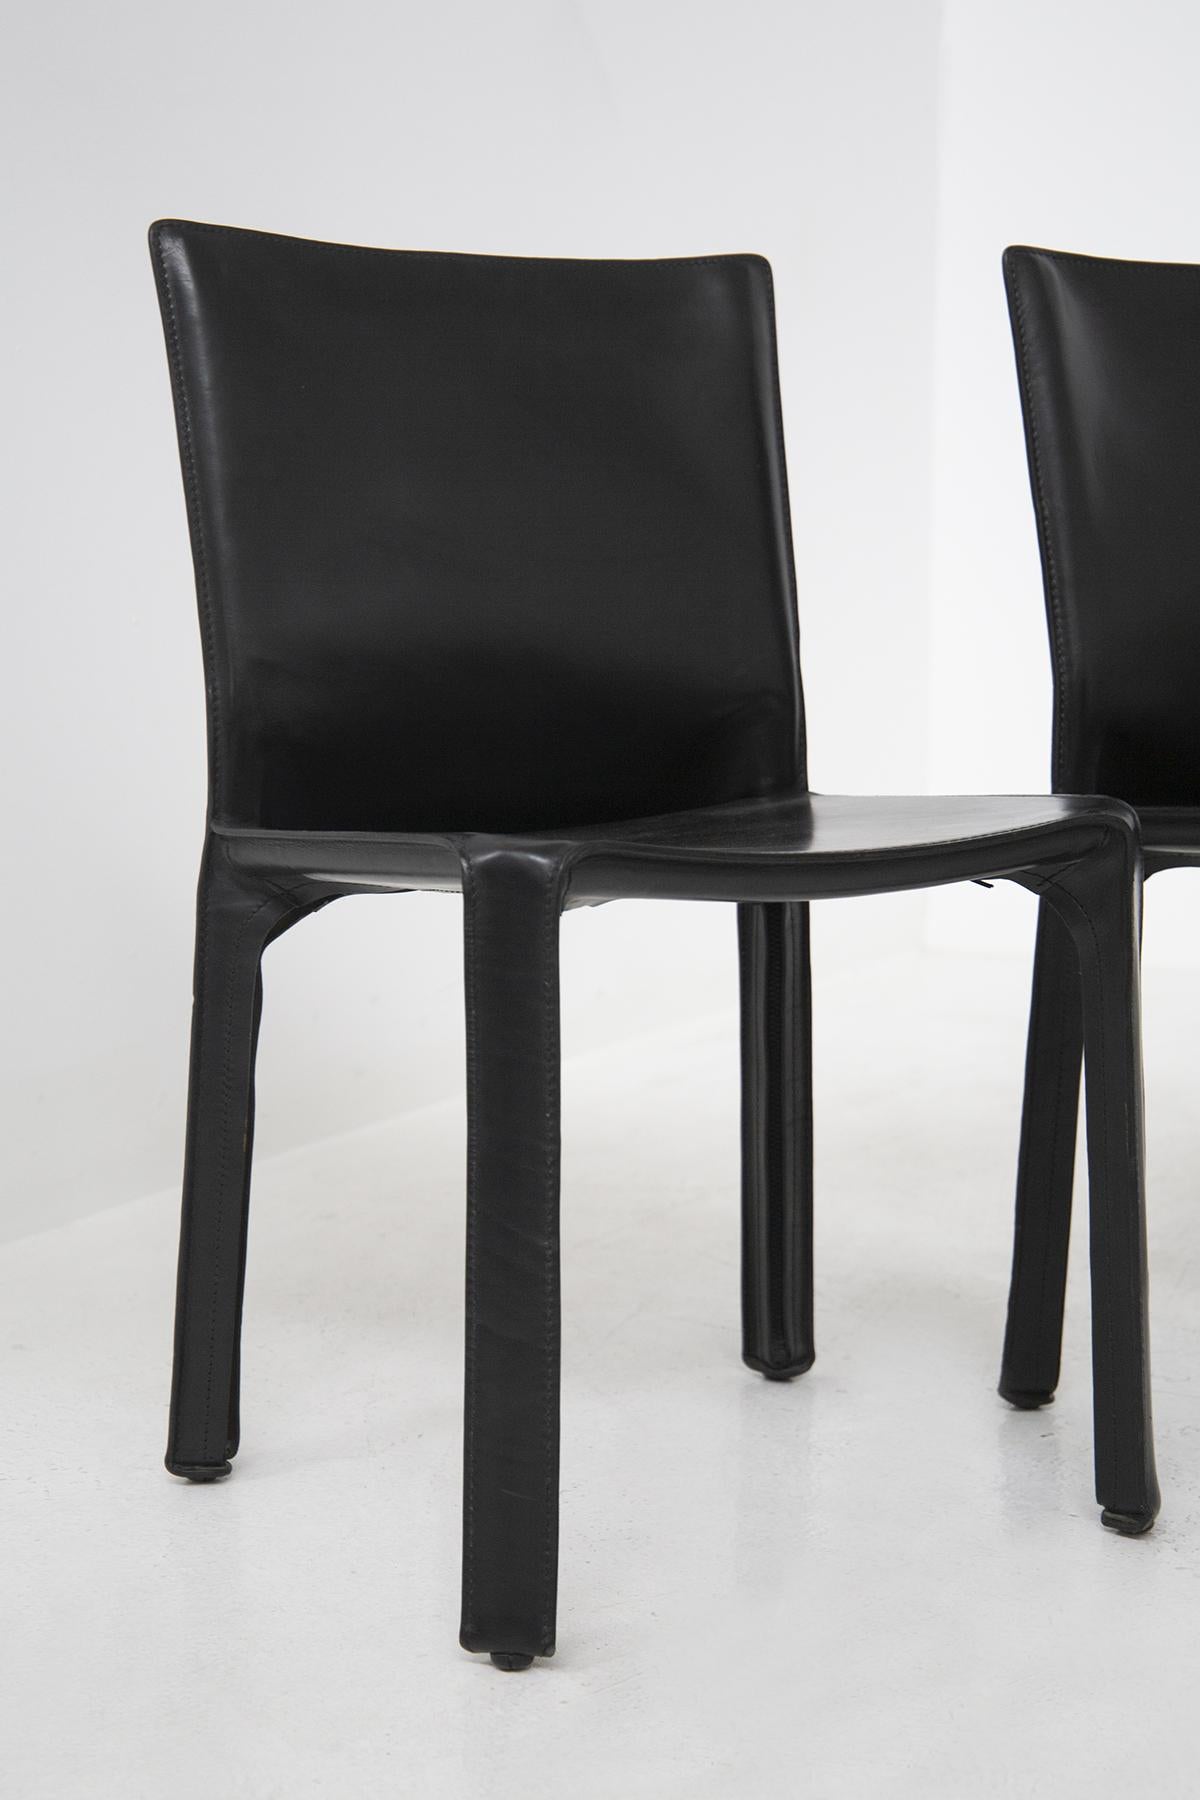 Mid-Century Modern Black Leather Chairs by Mario Bellini for Cassina